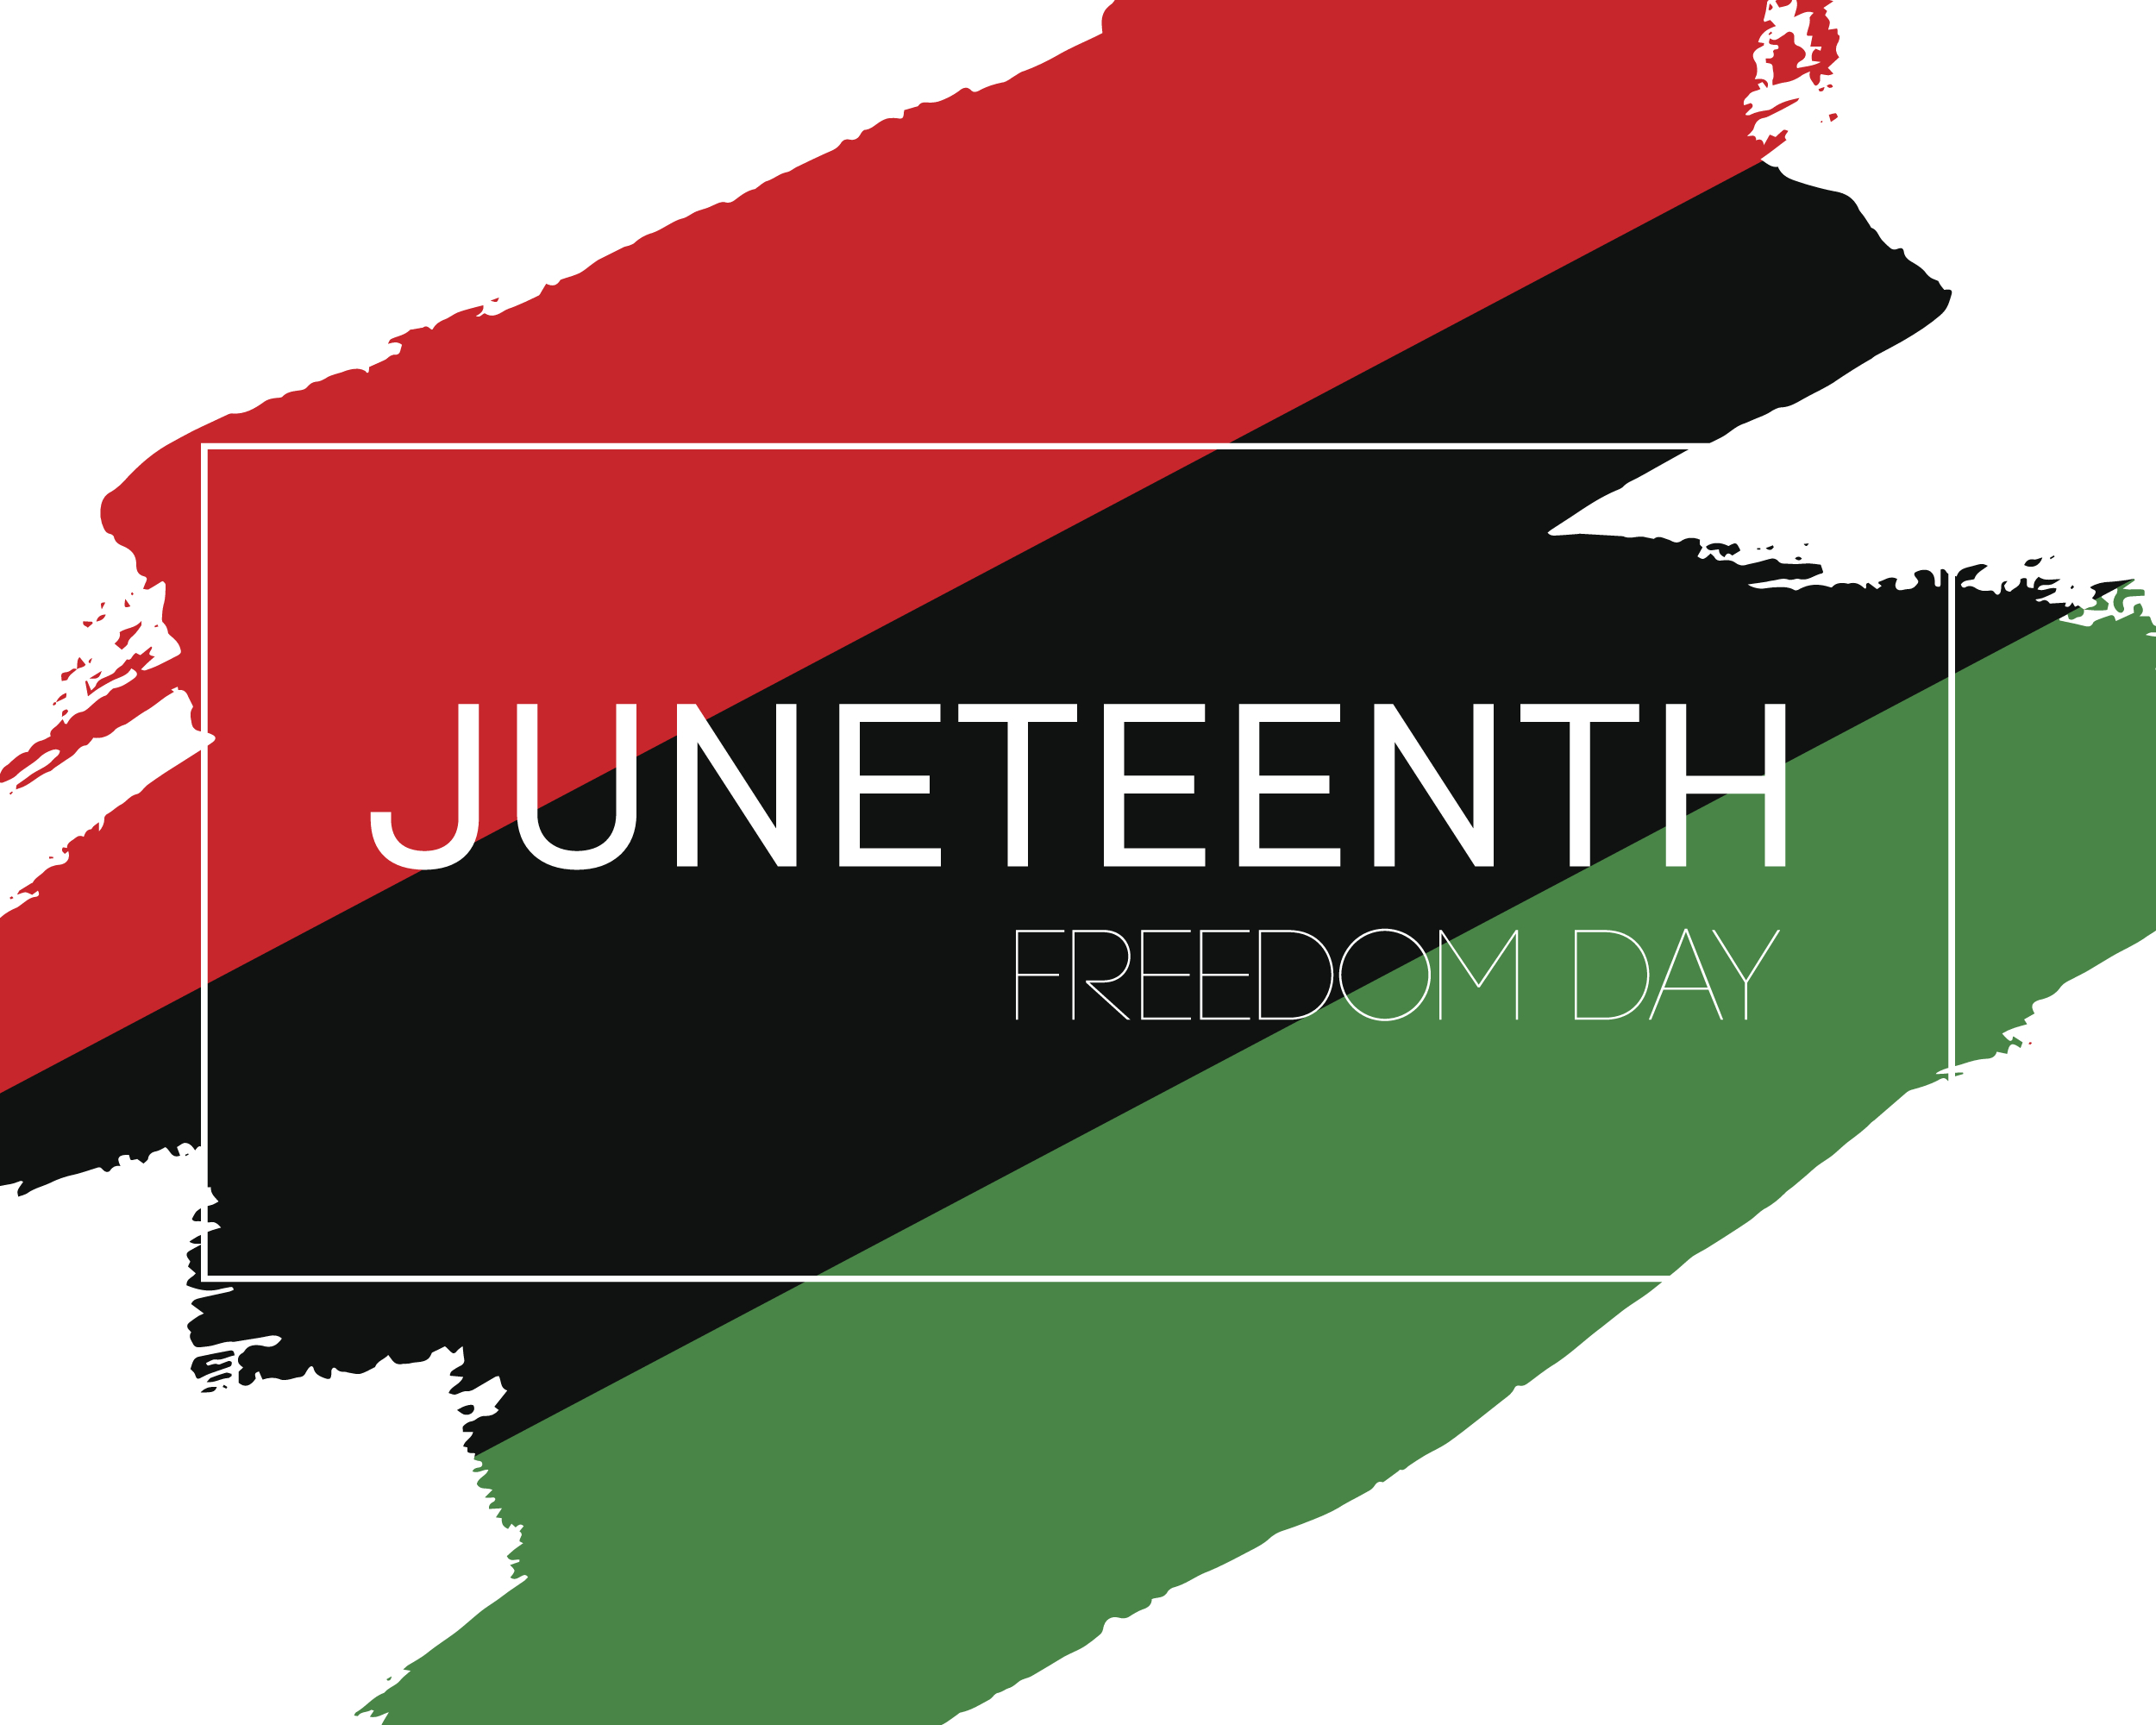 History and Tradition Takes the Stage on Juneteenth